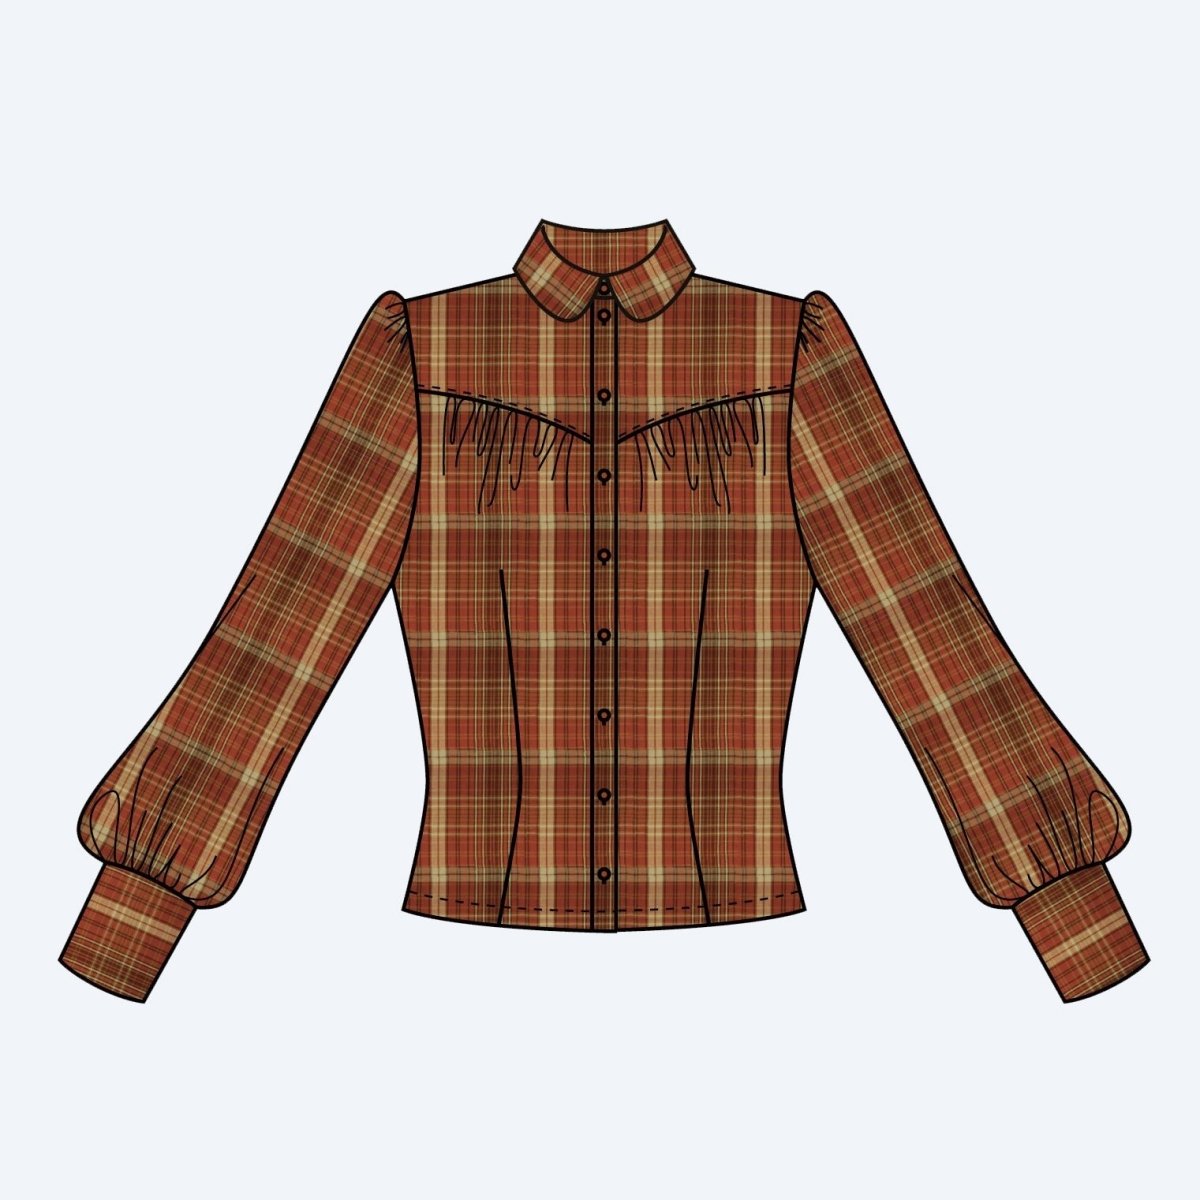 Coloured computer line drawing of a vintage inspired blouse with long sleeves and round collar- The Bishopess Blouse by Emmy Design Sweden in rust plaid